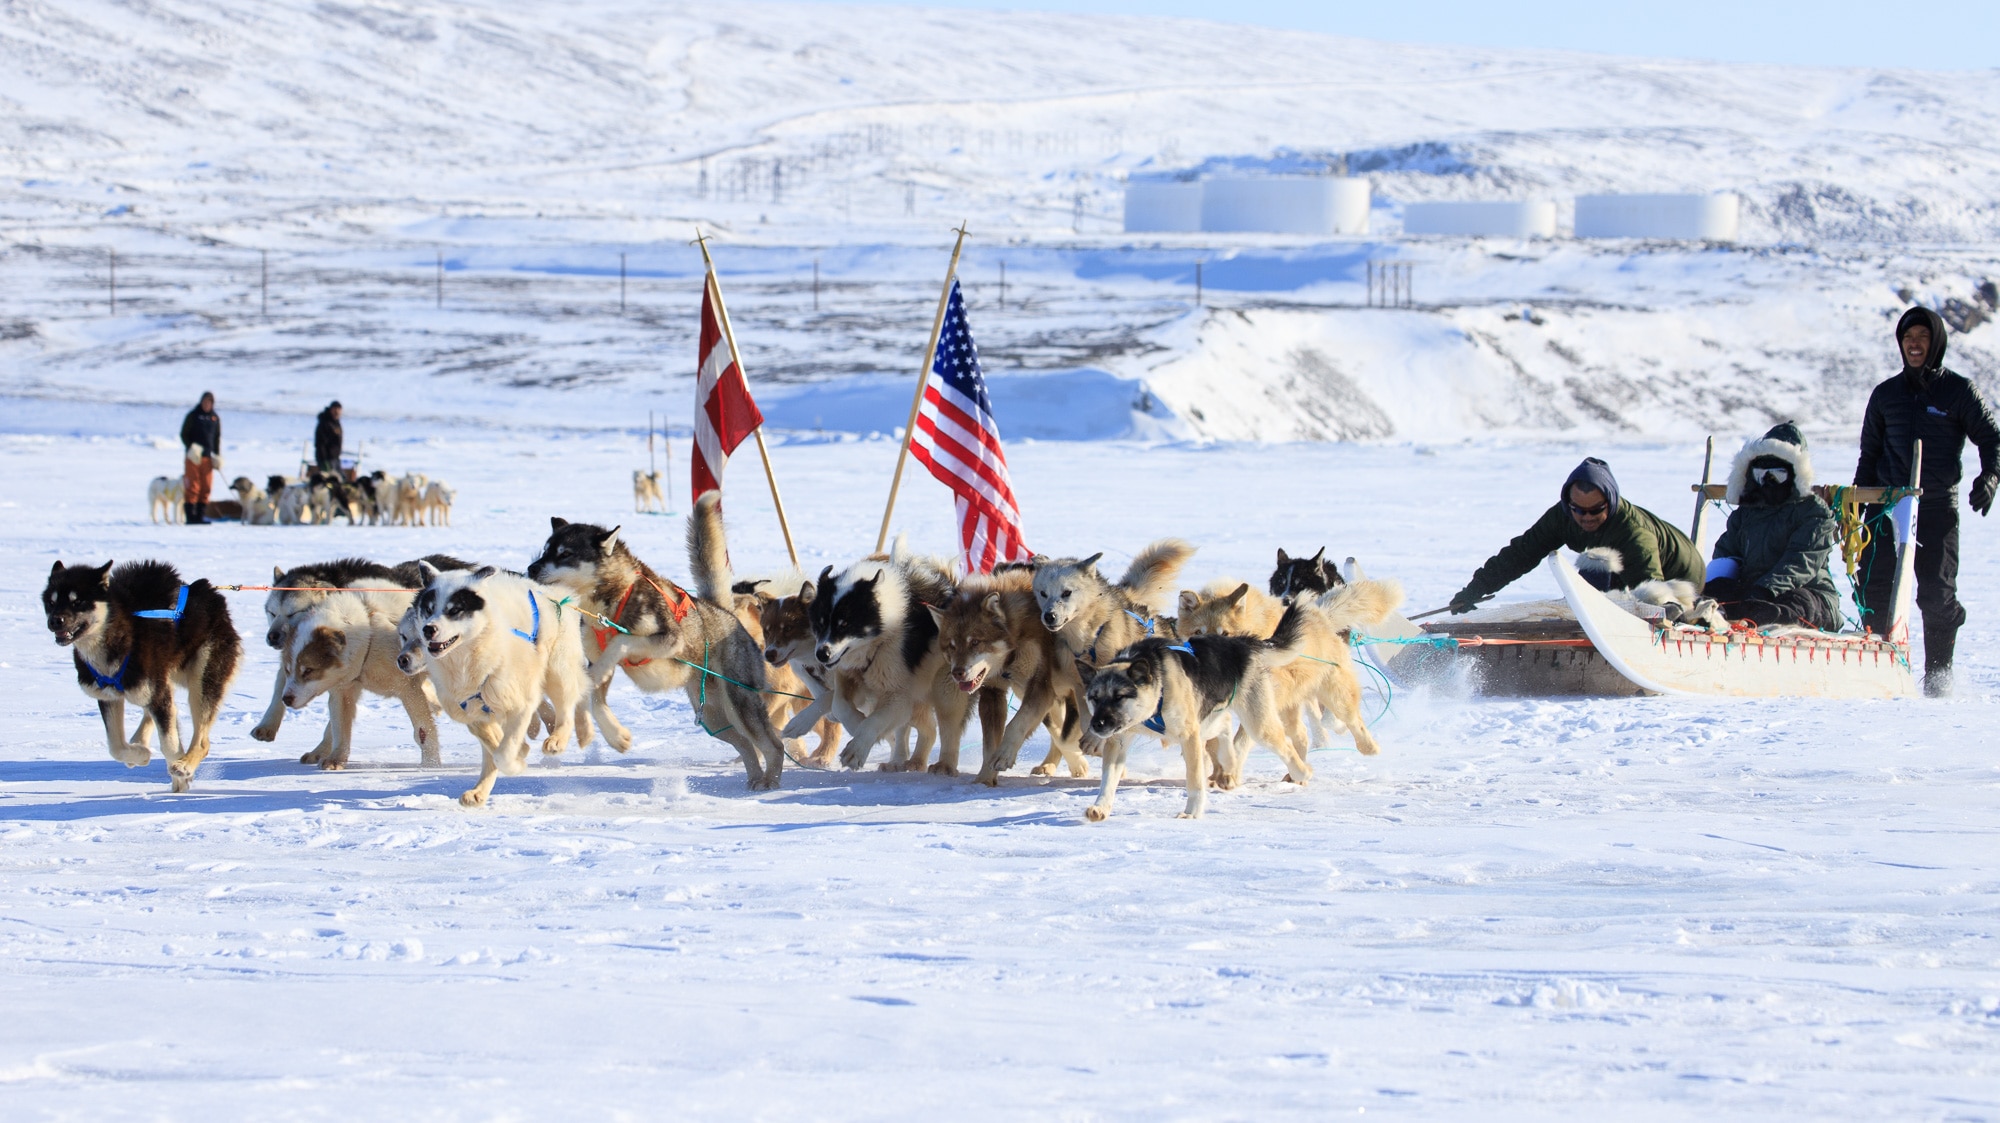 Dogs competing in a dog sledding race